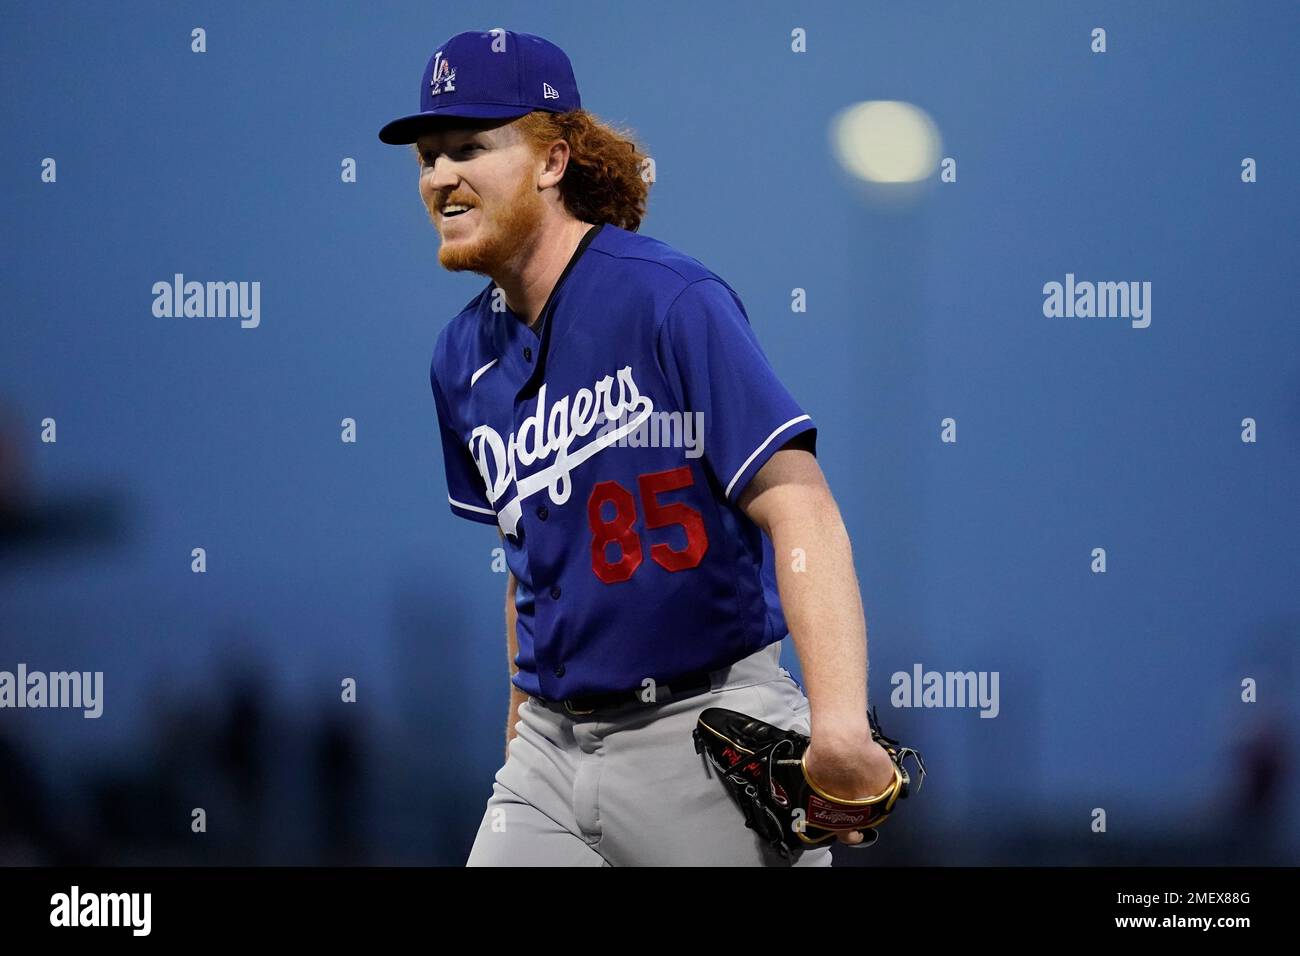 Los Angeles Dodgers starting pitcher Dustin May (85) smiles after